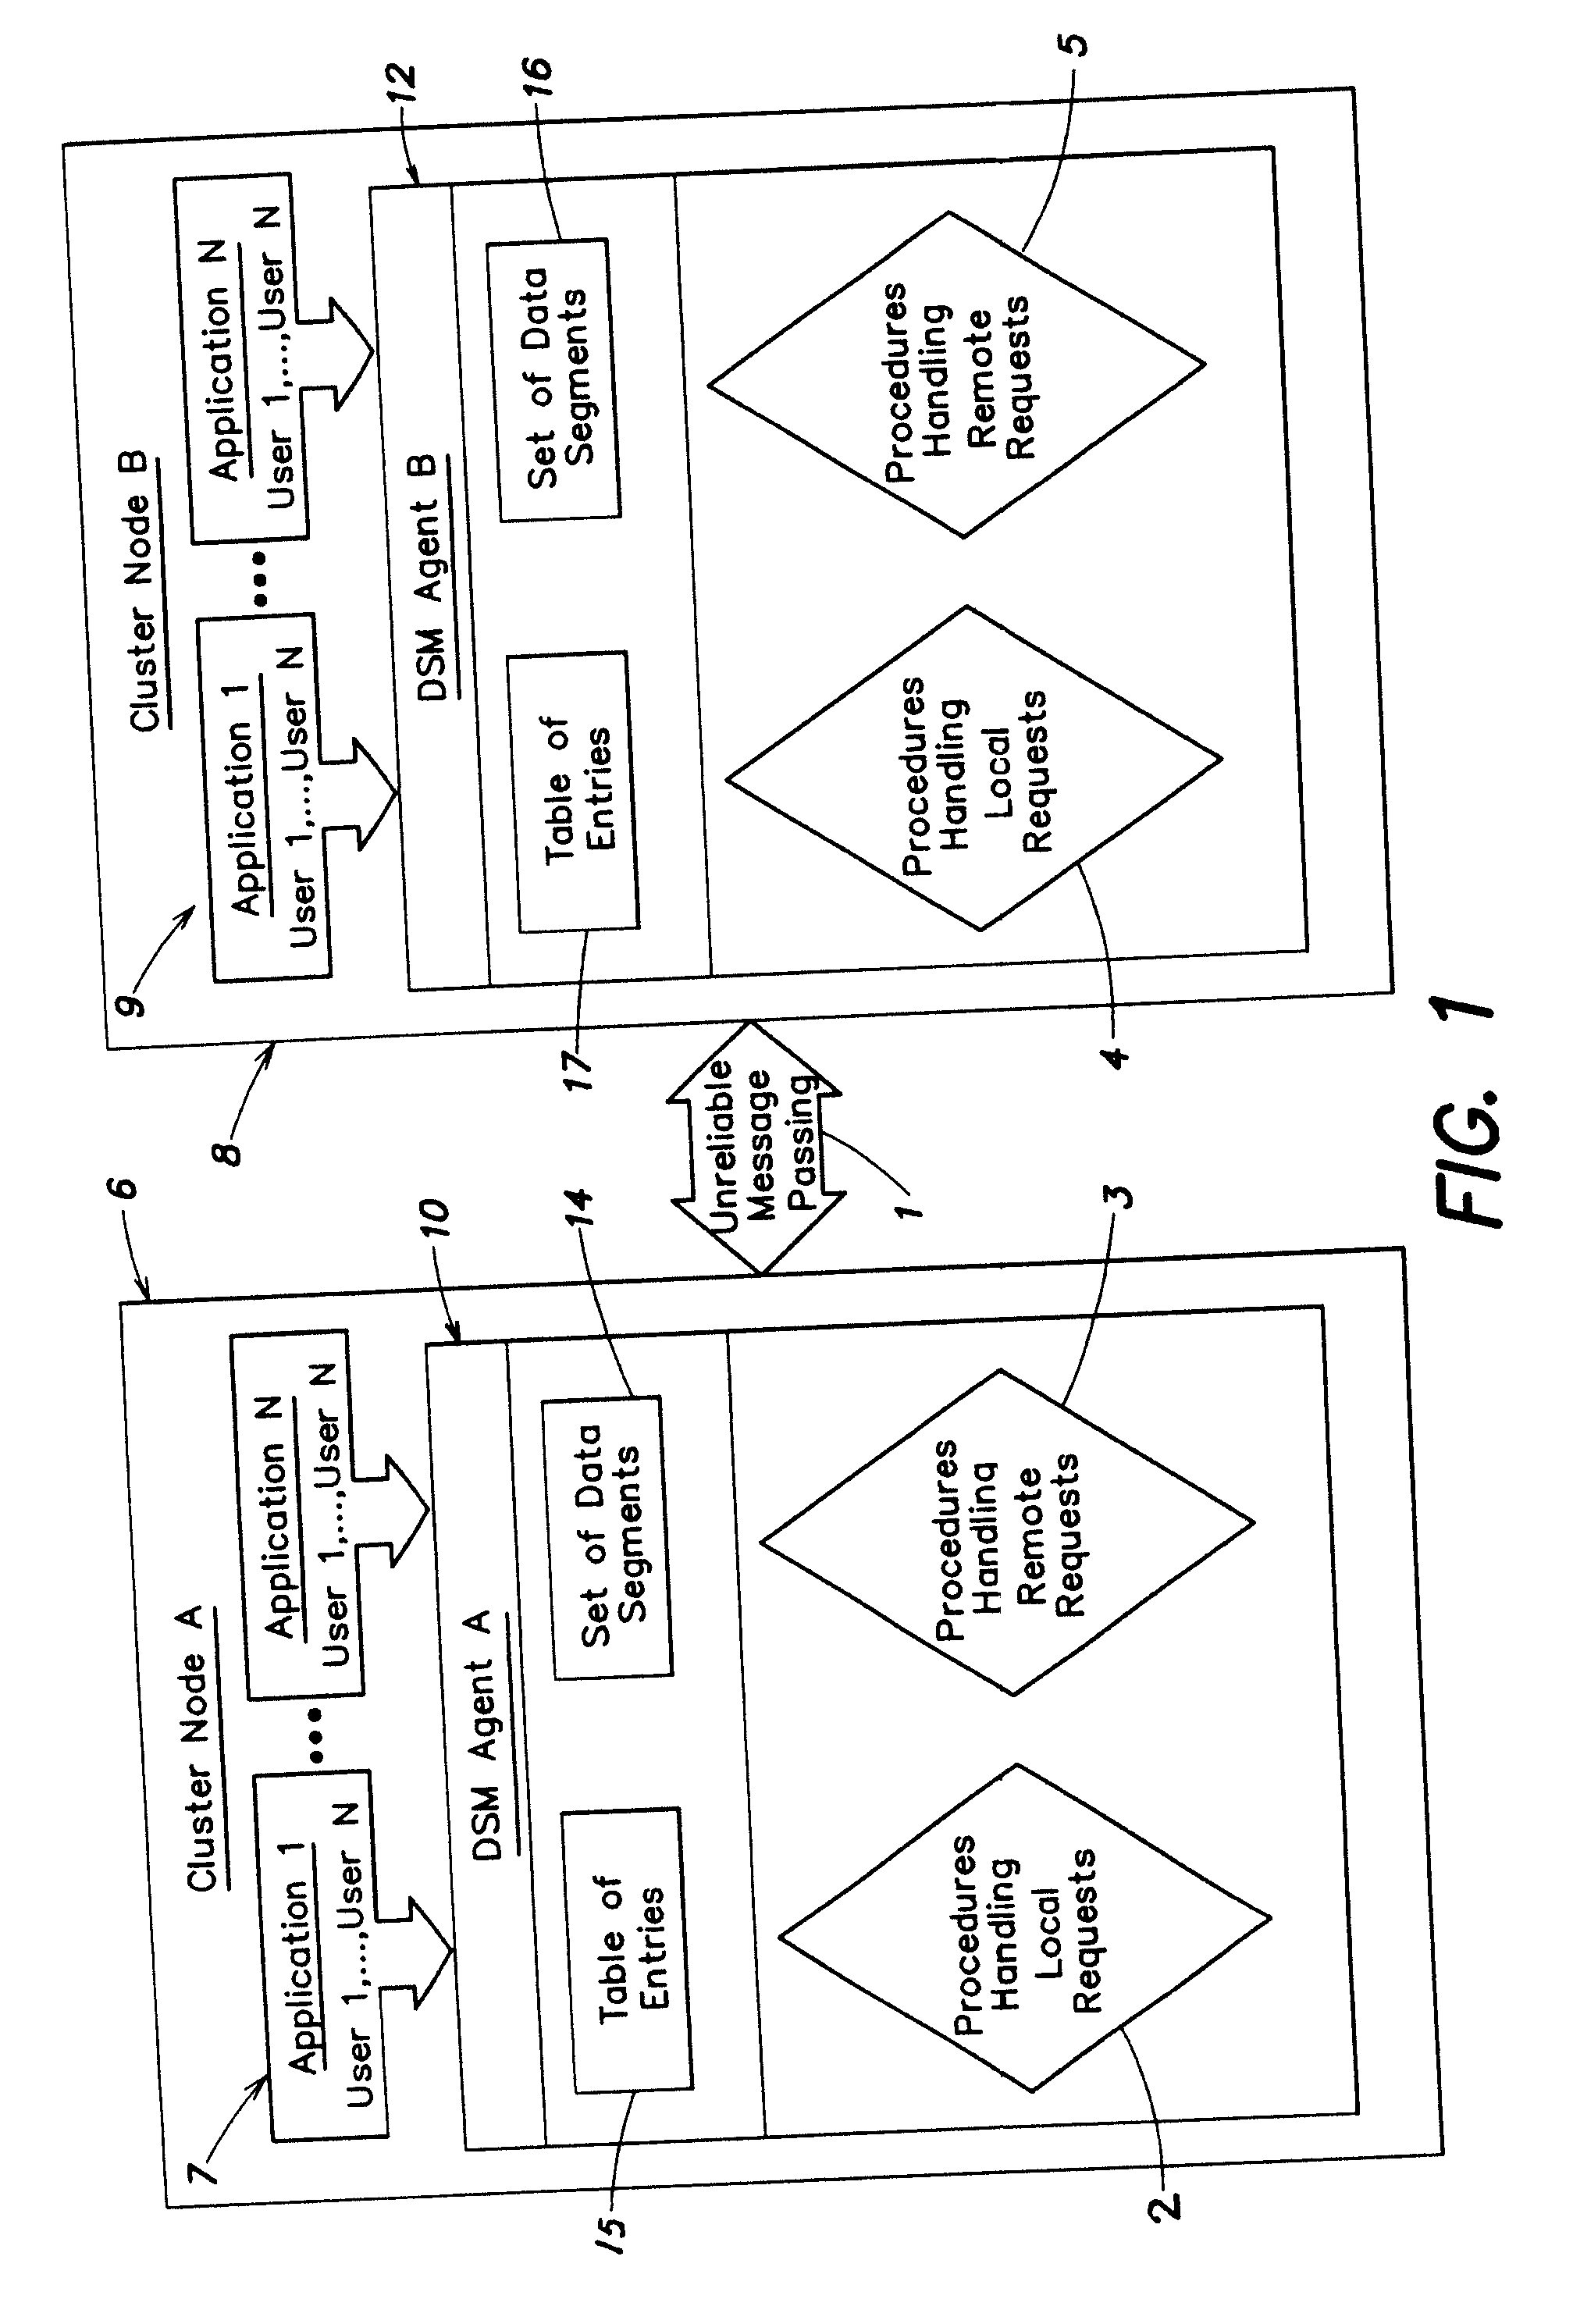 Transactional Processing for Clustered File Systems